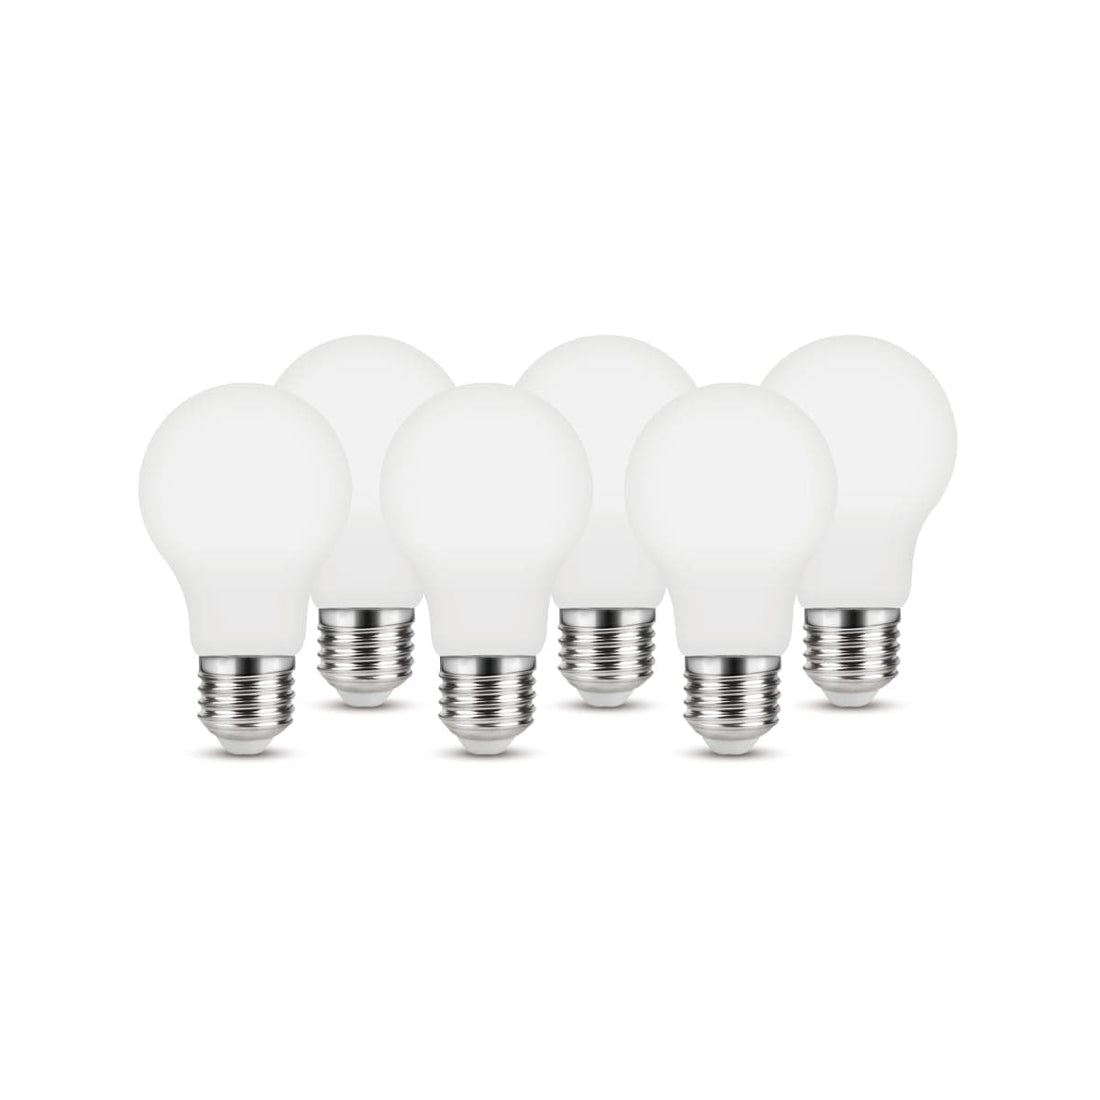 6 LED BULBS 100W FROSTED SPHERE NATURAL LIGHT